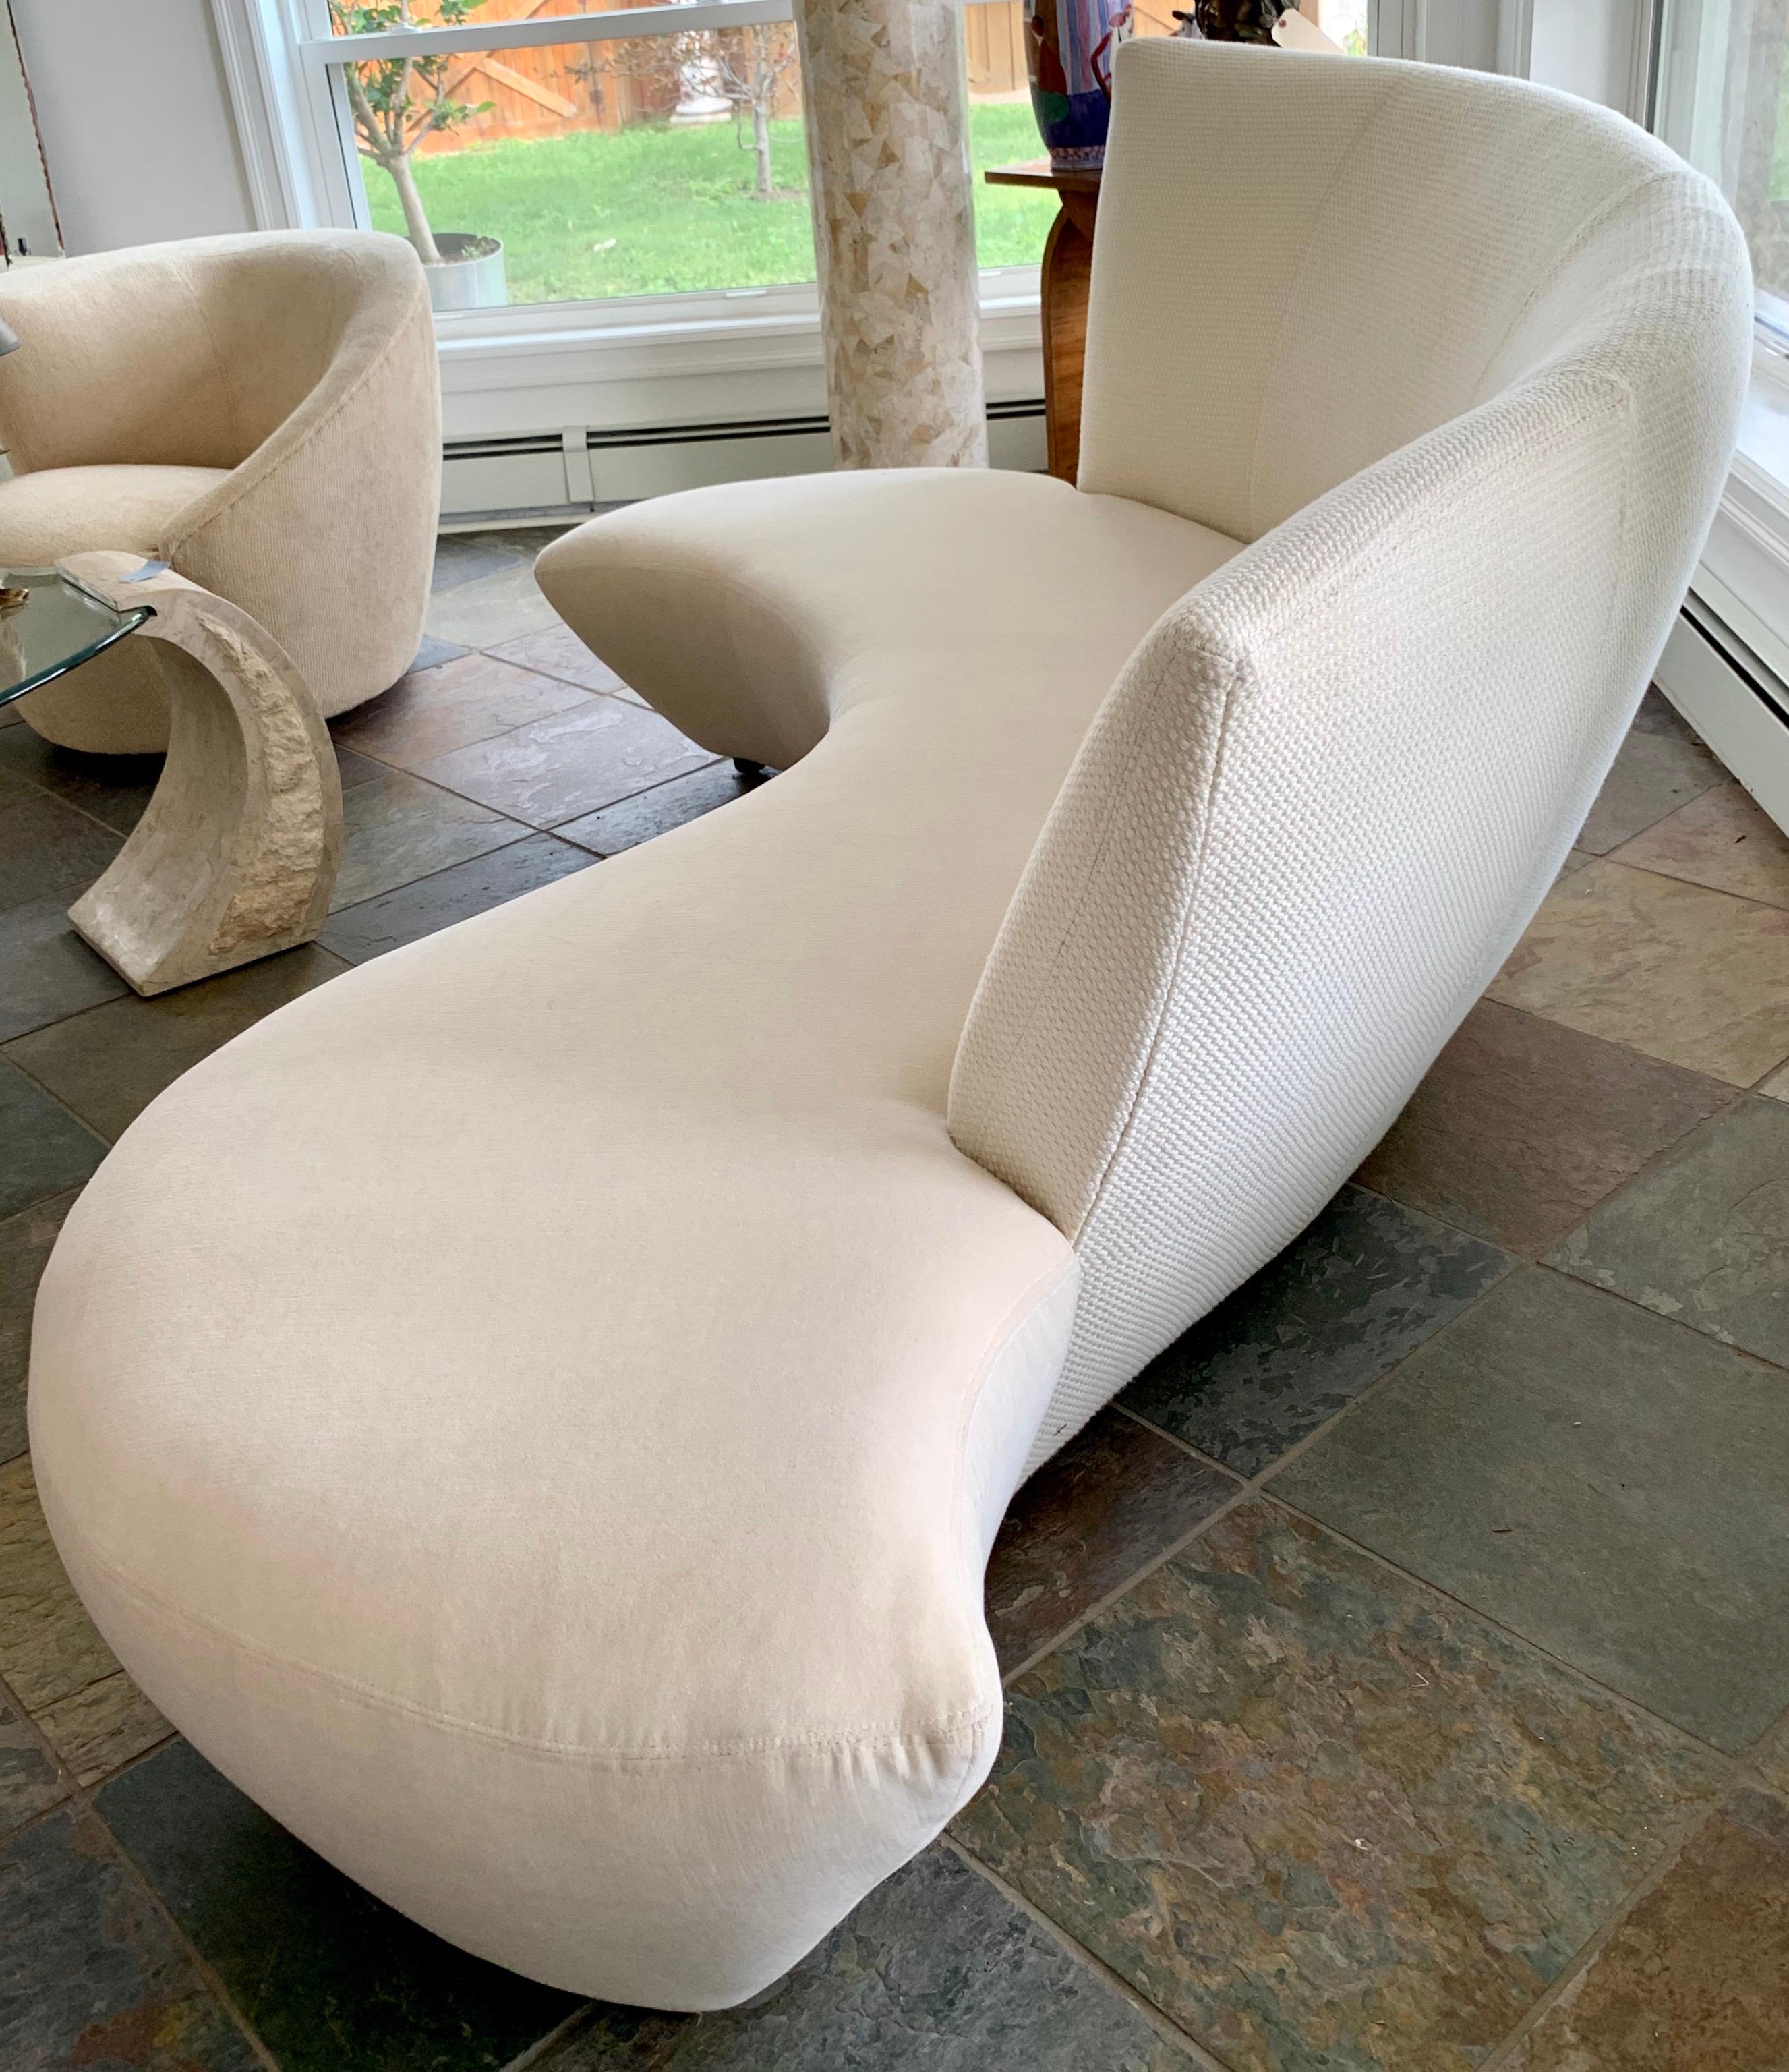 A sculptural modern sofa designed by Vladimir Kagan and inspired by the curves and undulations of the Guggenheim Museum in Bilbao Spain. It was newly reupholstered last year and is stunning. Rare to see a serpentine Kagan sofa in such good condition